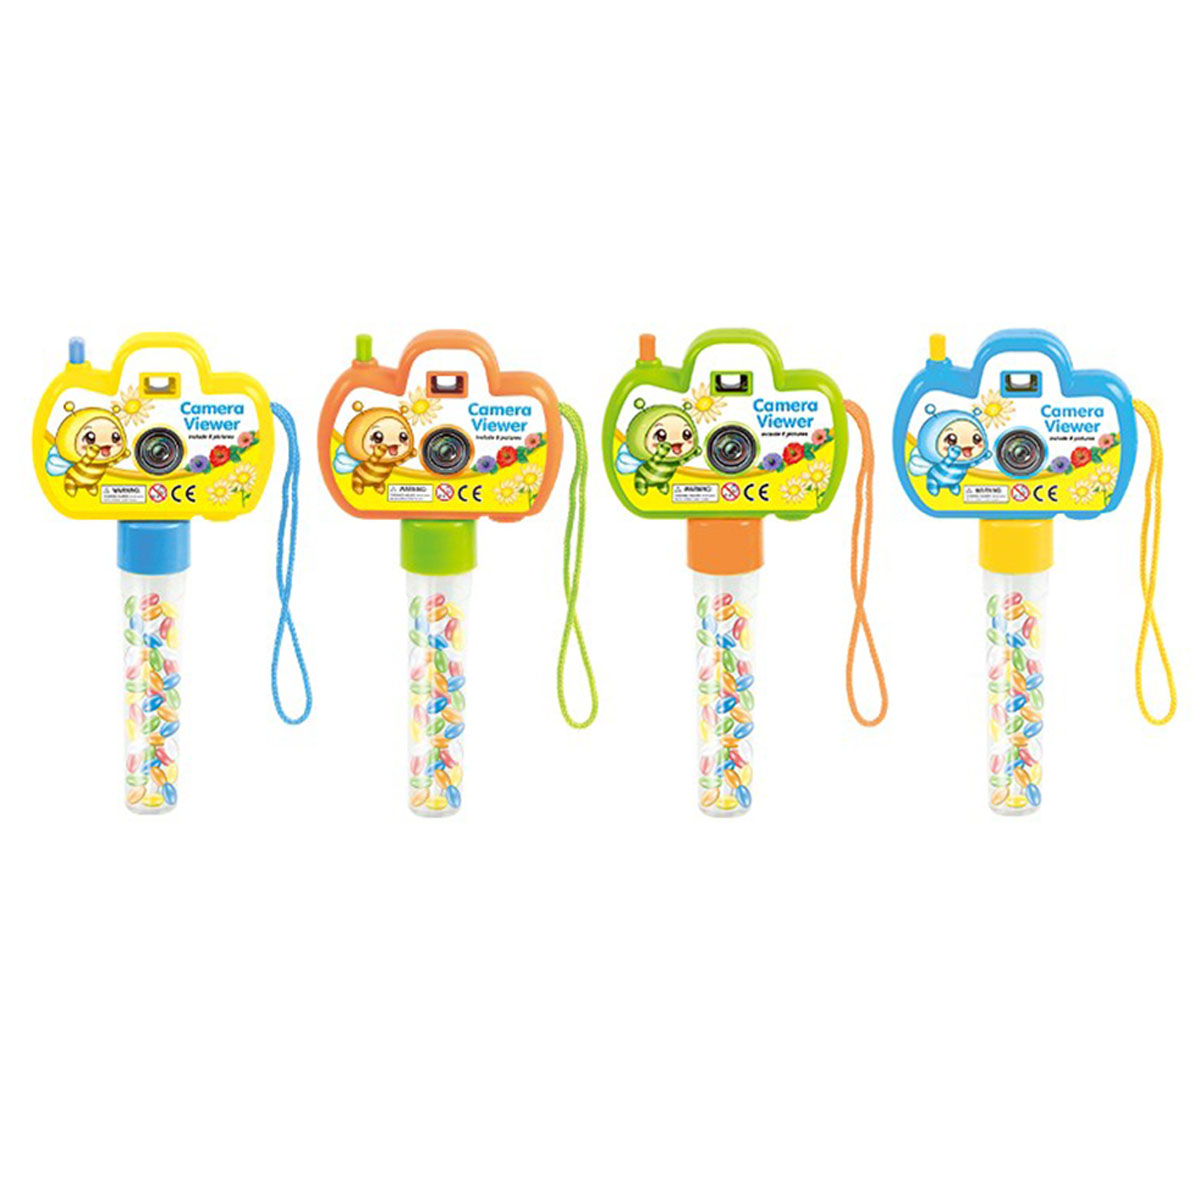 A group of Happy Bee Camera Toys - 1pcs.